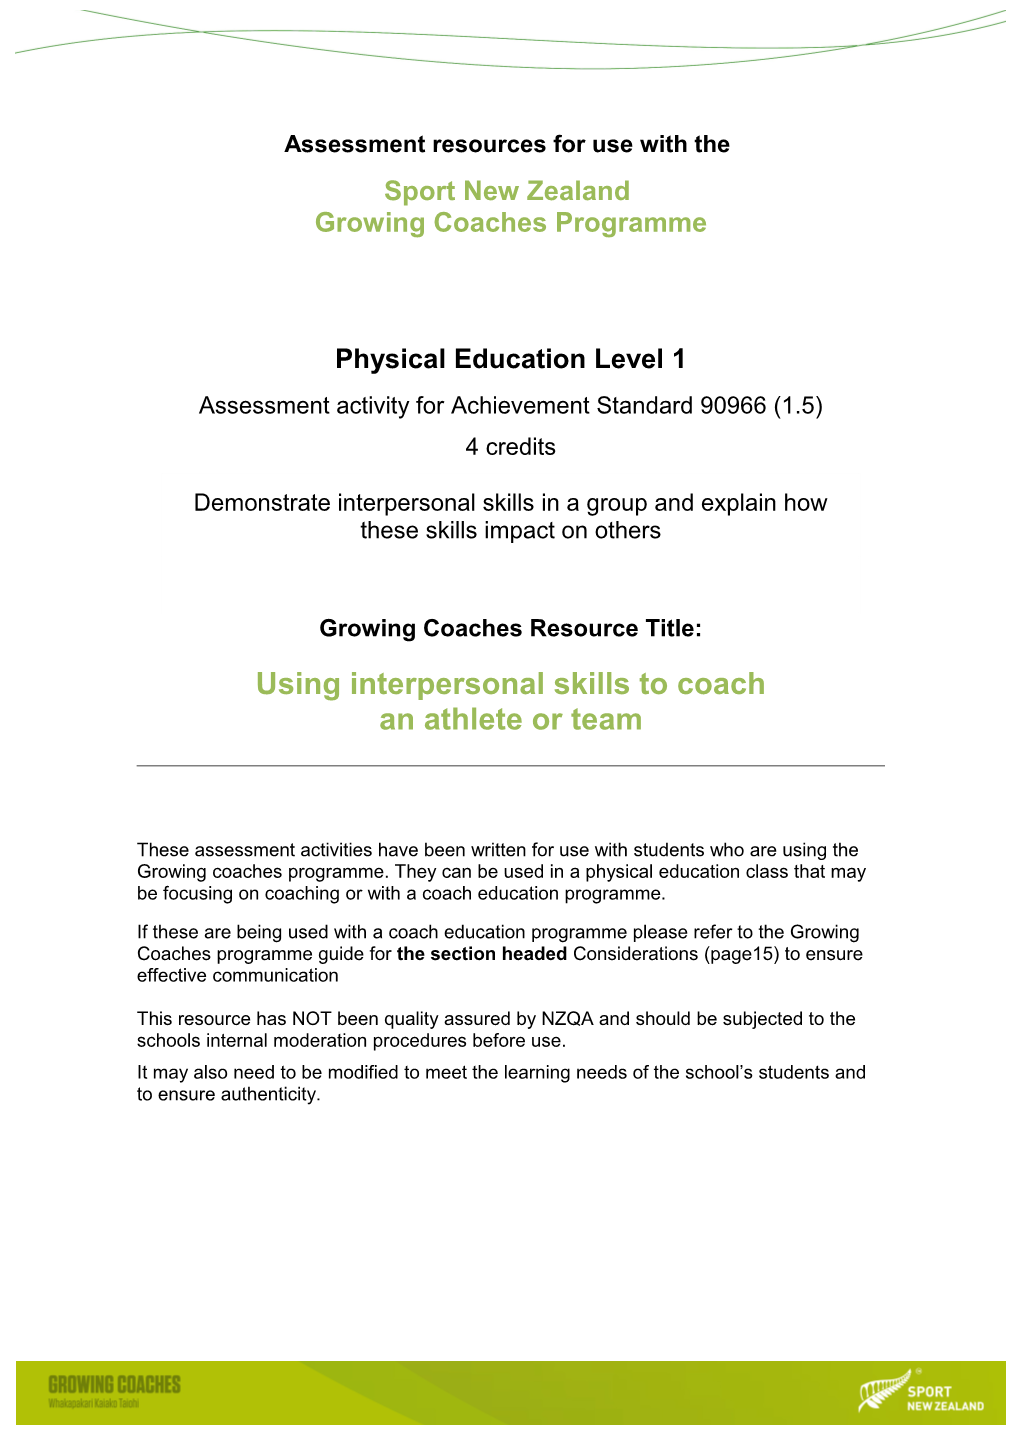 Assessment Resources for Use with The